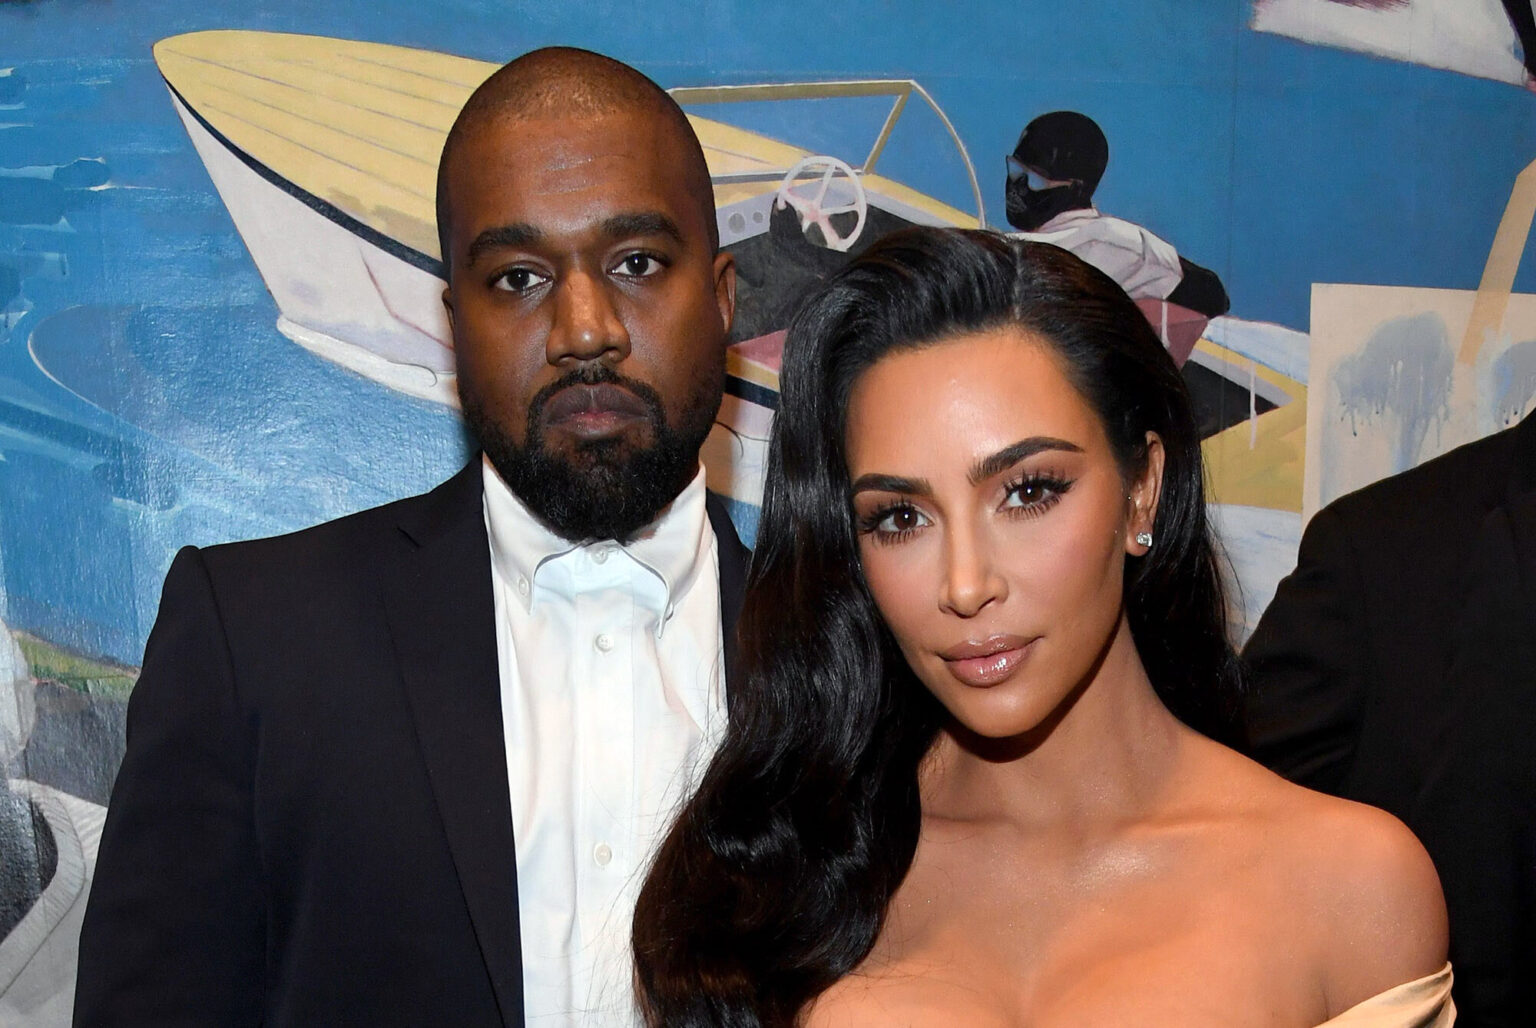 Kim Kardashian and Kanye West may not have the best marriage on the block these days. Here's why the internet thinks they're on the road to divorce.